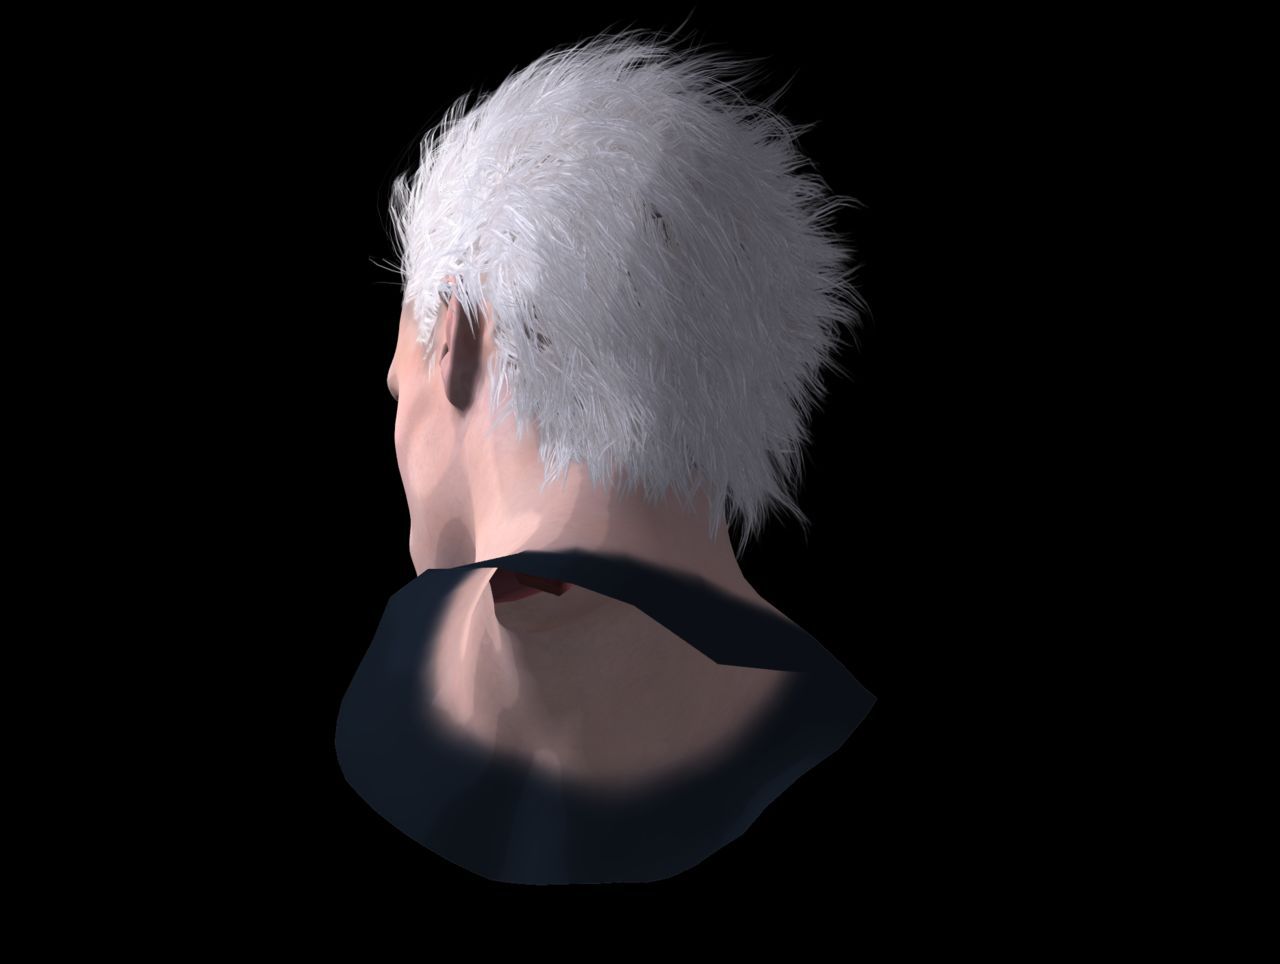 [J.A.] DMC5 | Vergil Head Reference PNG 24